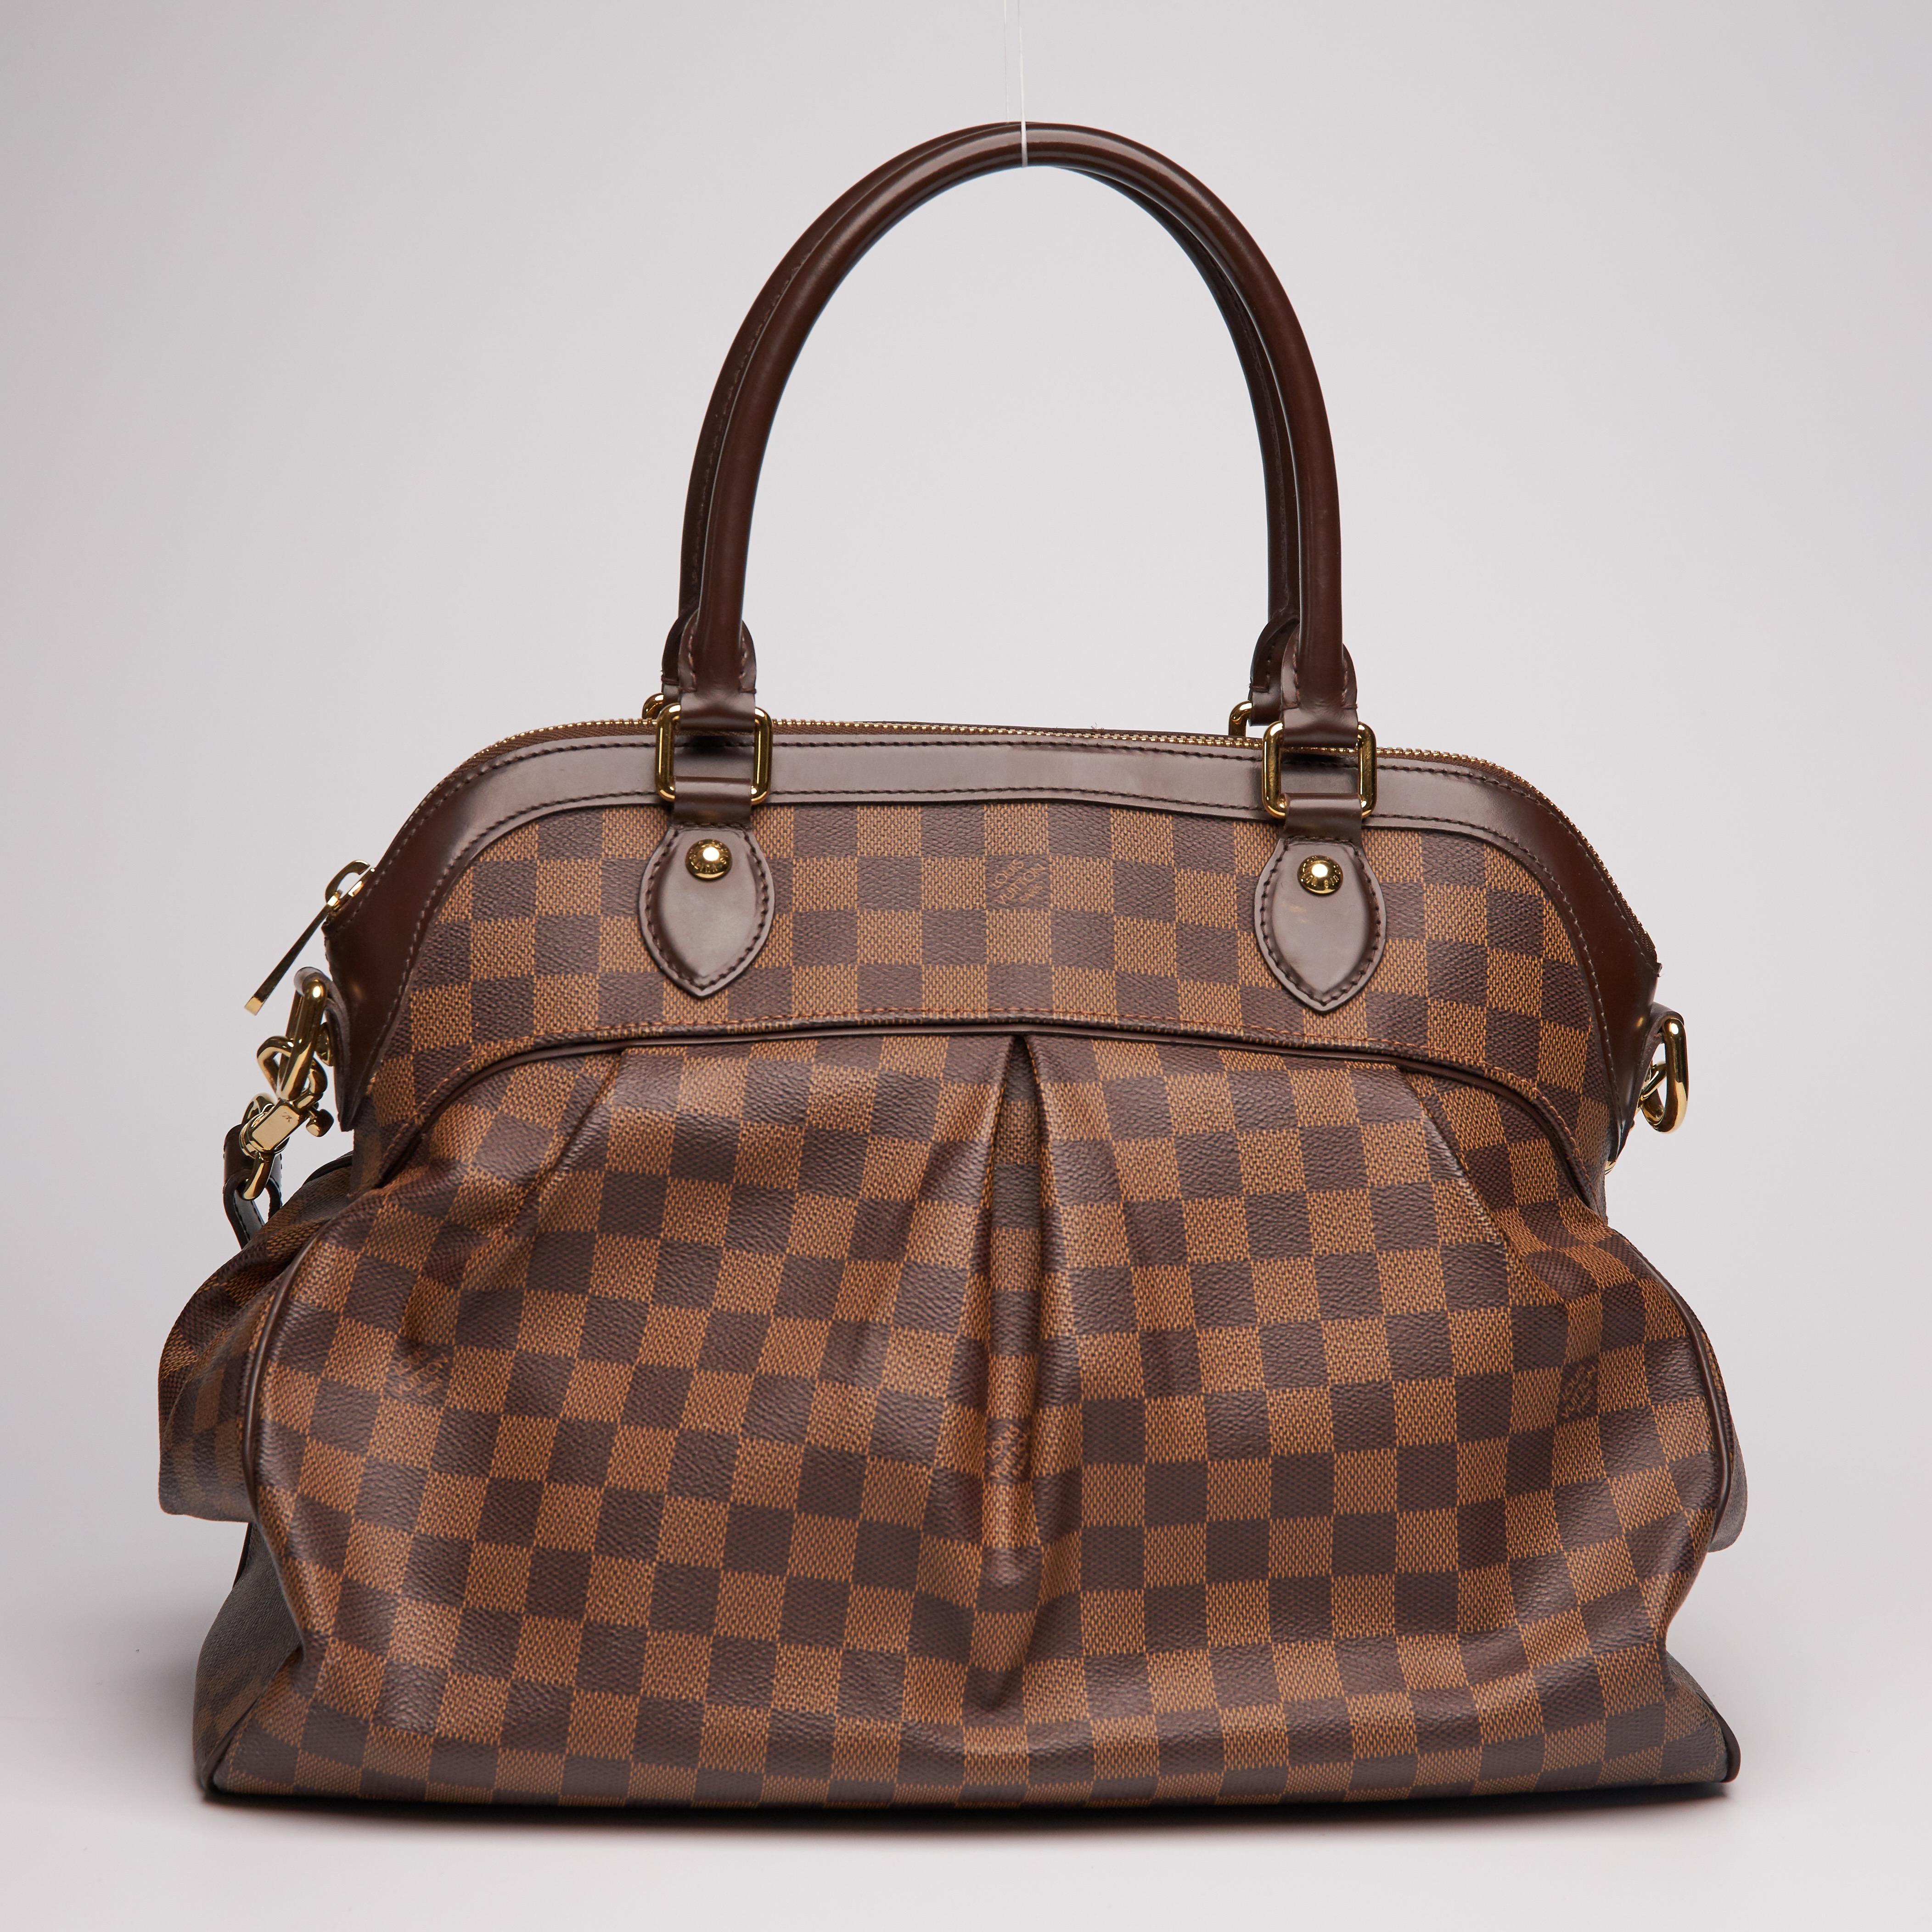 This bag is named after the glorious Trevi Fountain in Rome. The bag is made of signature Louis Vuitton damier ebene coated canvas. The bag features chocolate brown leather trim, dual rolled leather top handles, an optional adjustable shoulder